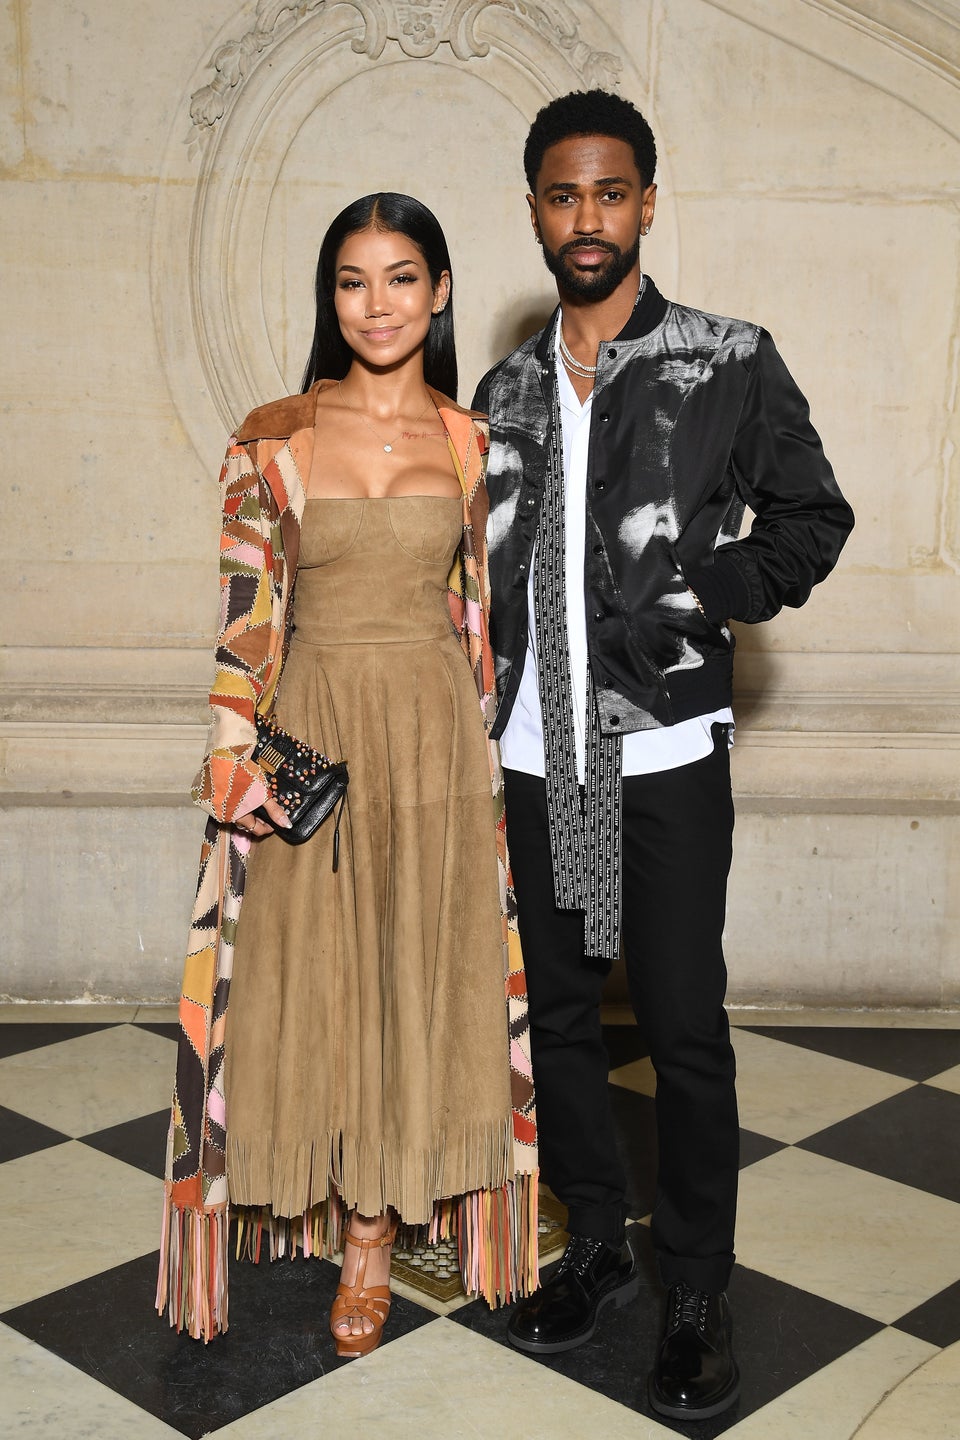 Big Sean Wishes Girlfriend Jhene Aiko A Happy Birthday: ‘I Love You The Most Forever’